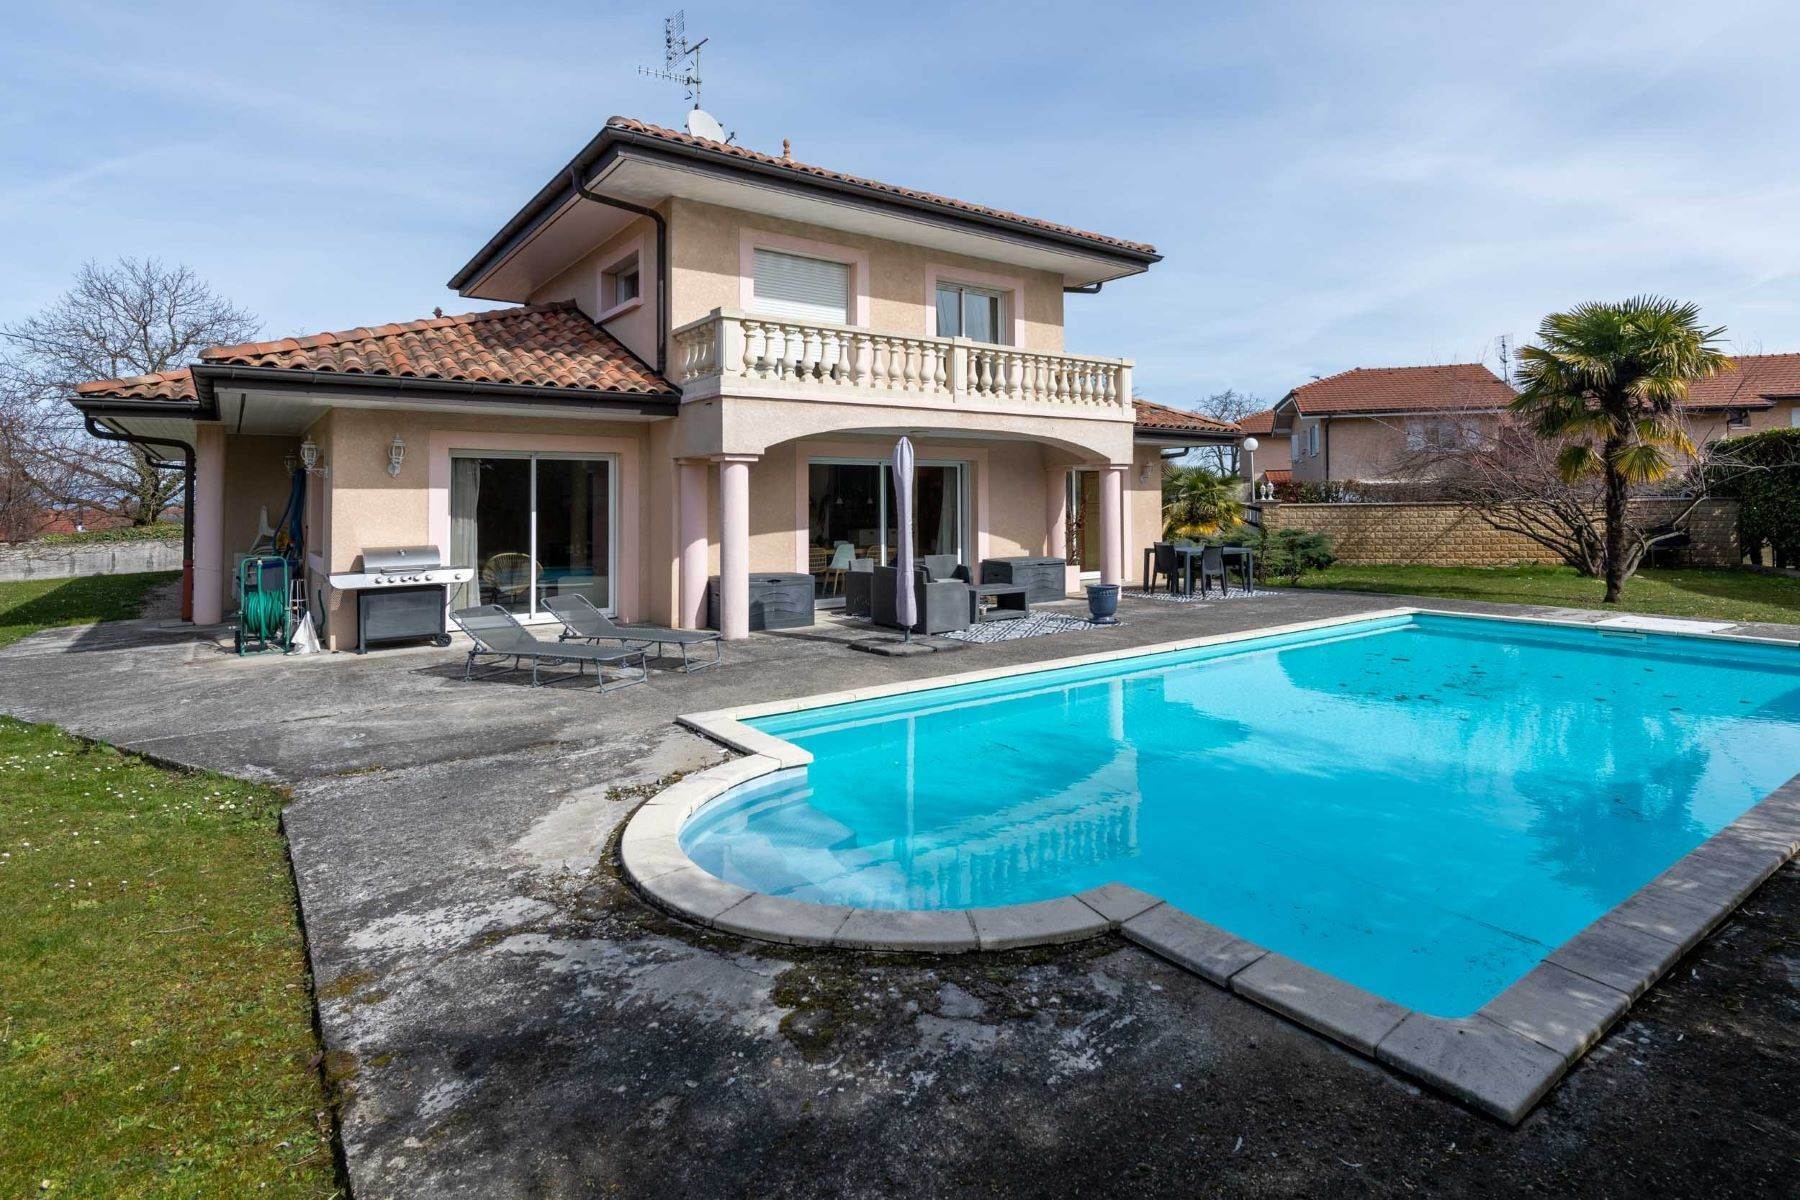 Single Family Homes for Sale at Sale FAMILY VILLA WITH POOL Marin, Rhone-Alpes 74200 France